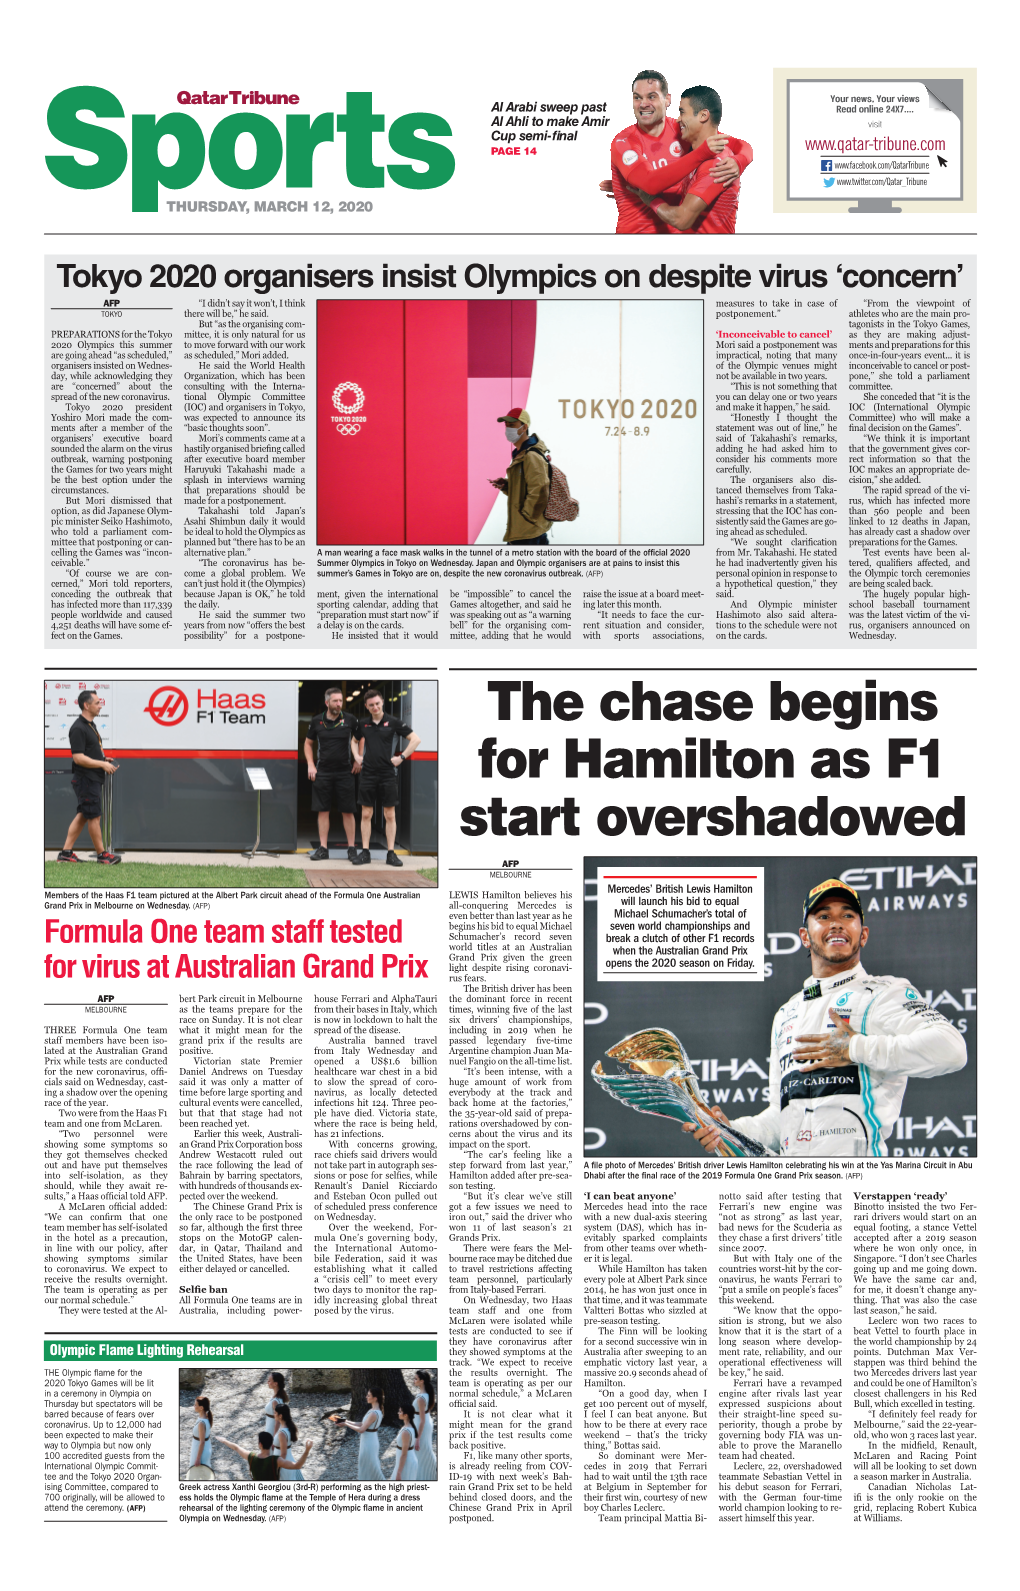 The Chase Begins for Hamilton As F1 Start Overshadowed